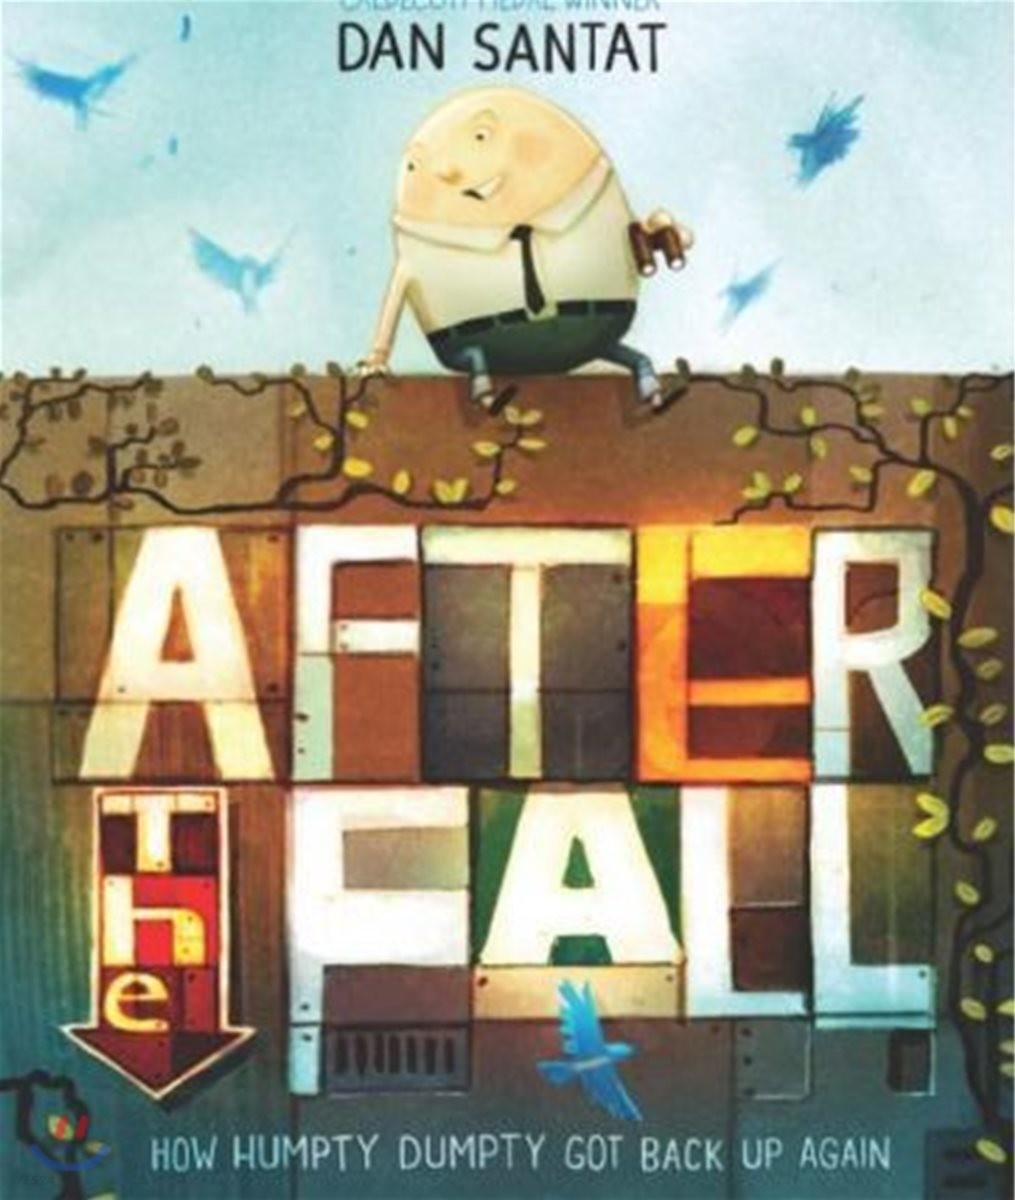 After the fall